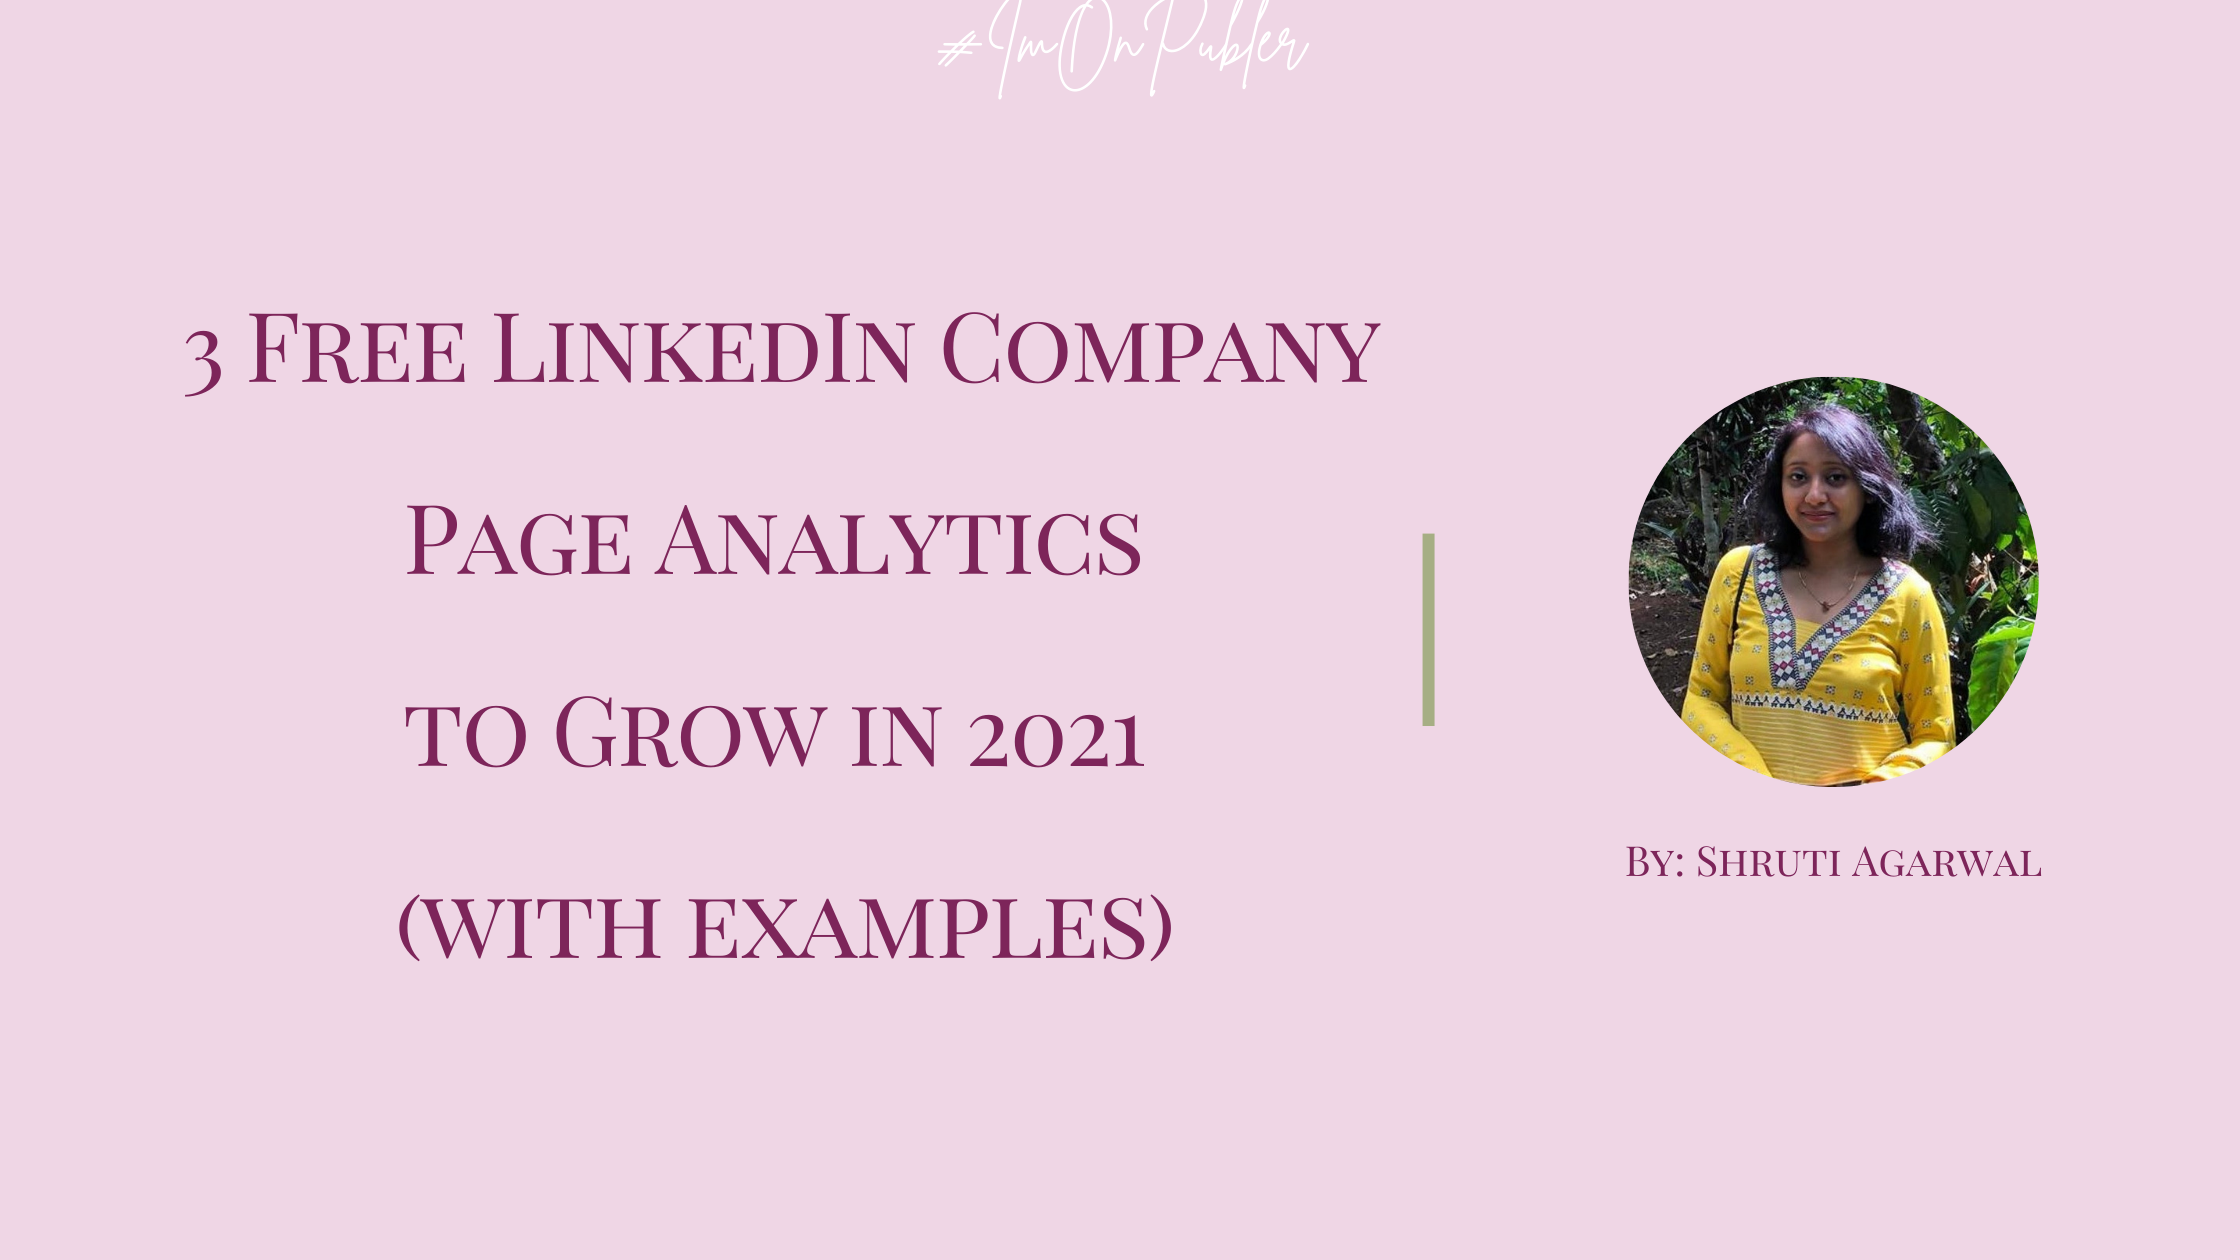 3 Free LinkedIn Company Page Analytics to Grow in 2021 (with examples) by Shruti Agarwal